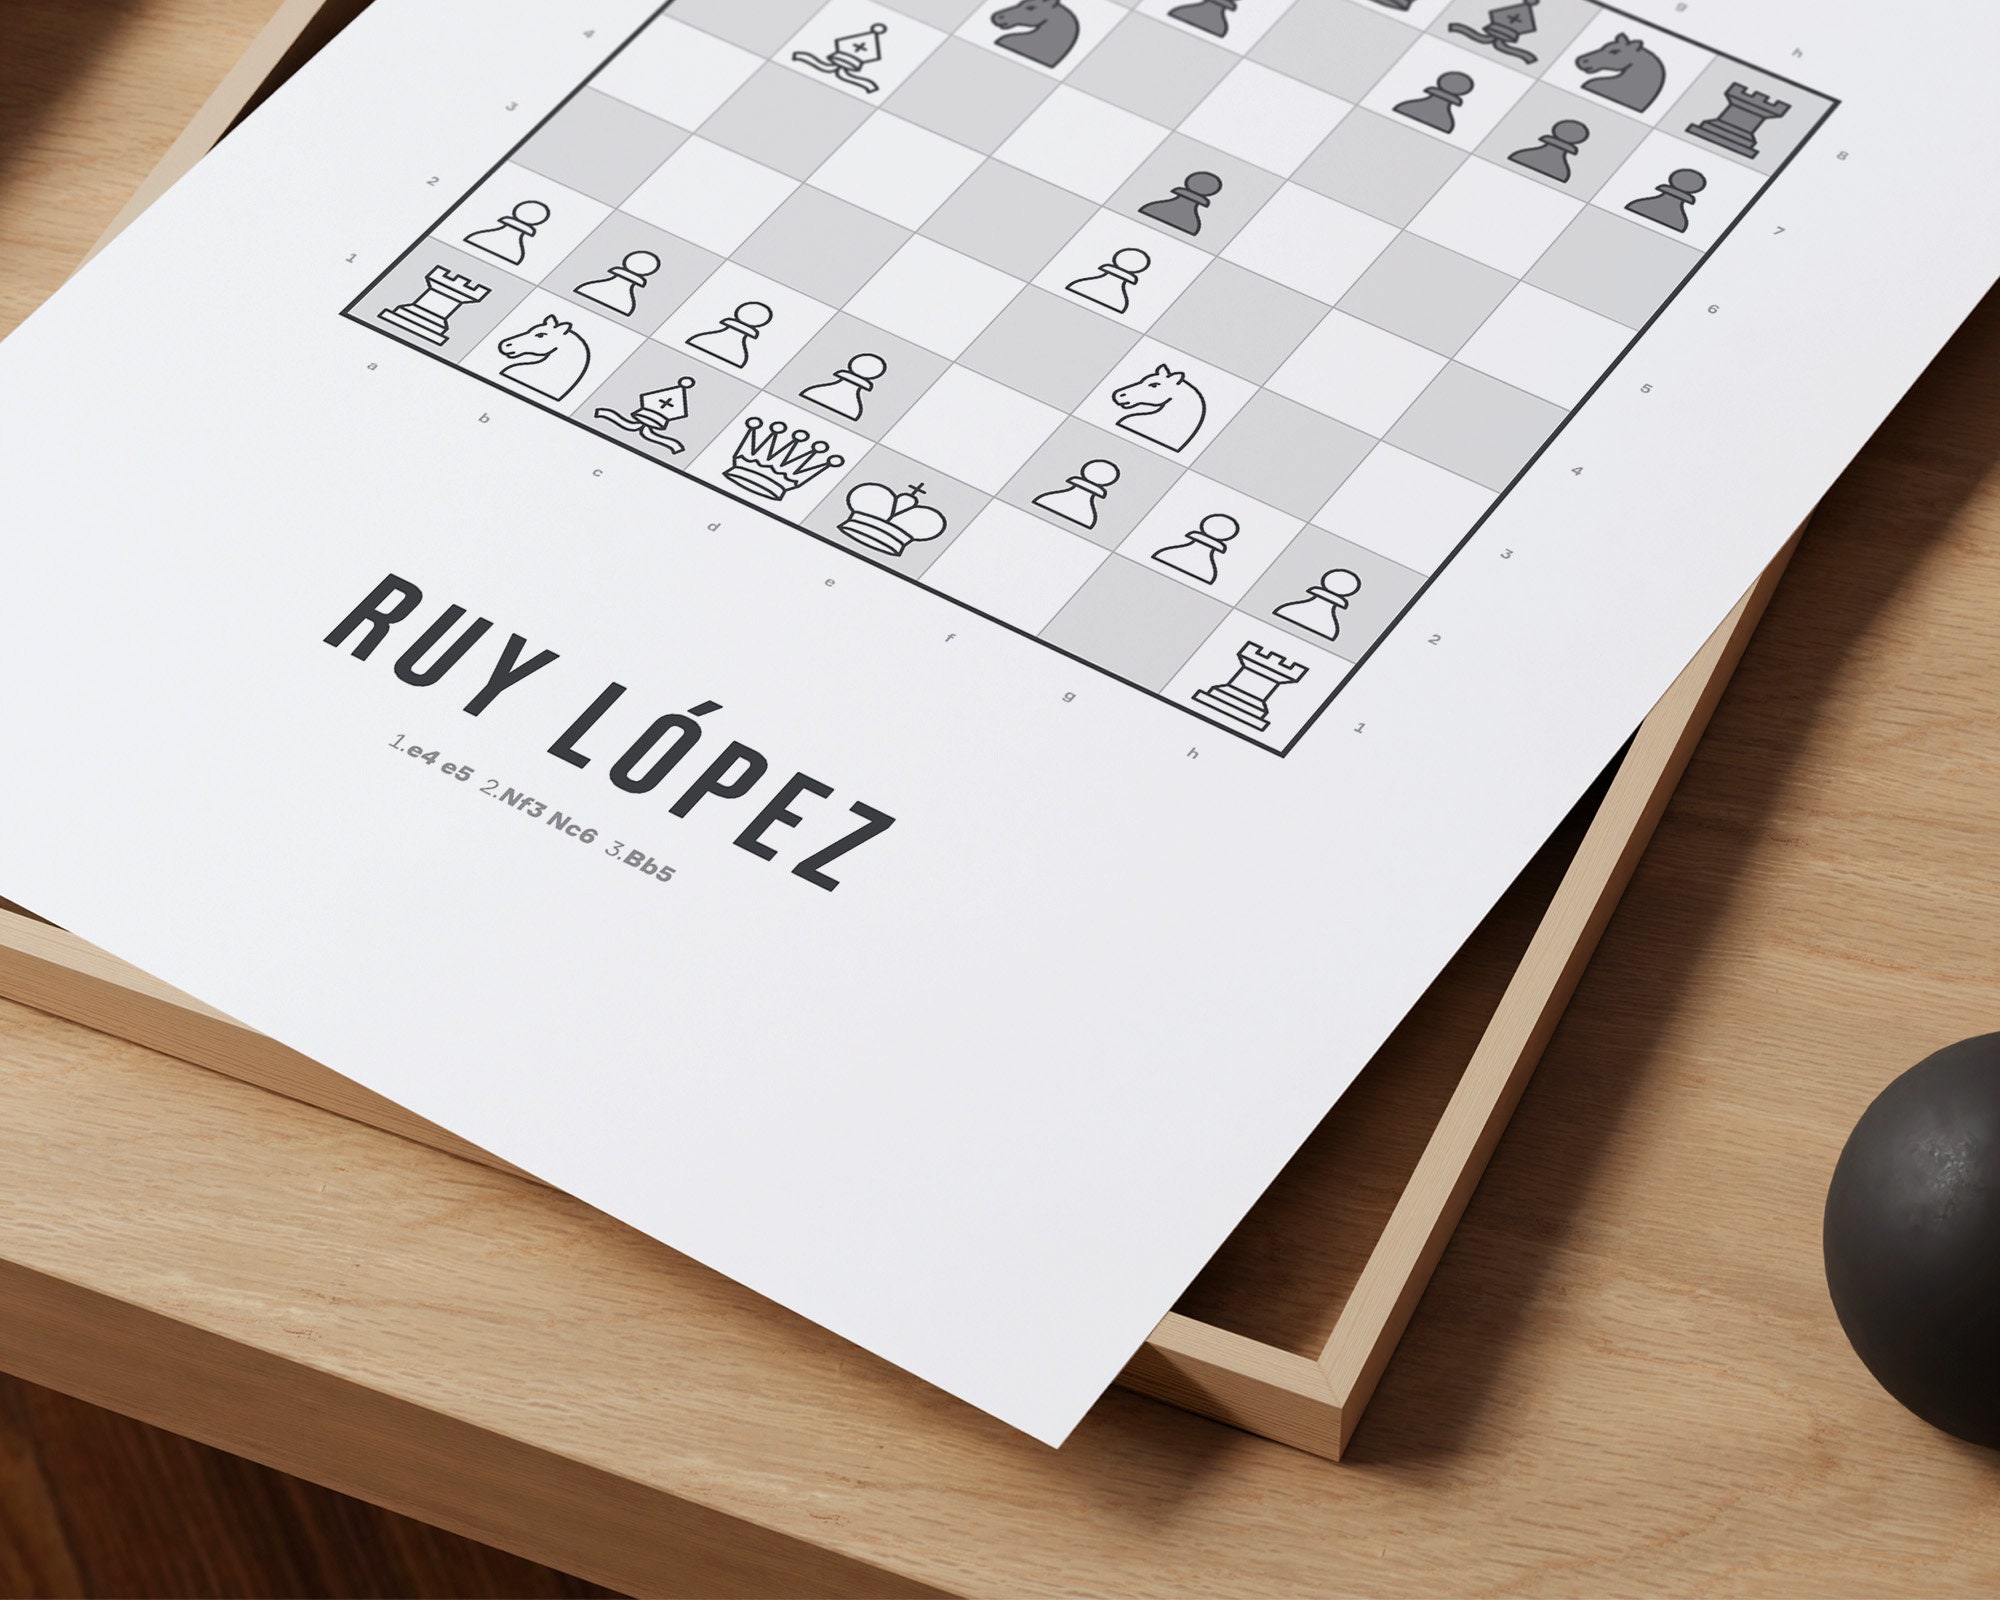 Ruy Lopez Chess' Poster, picture, metal print, paint by IMR